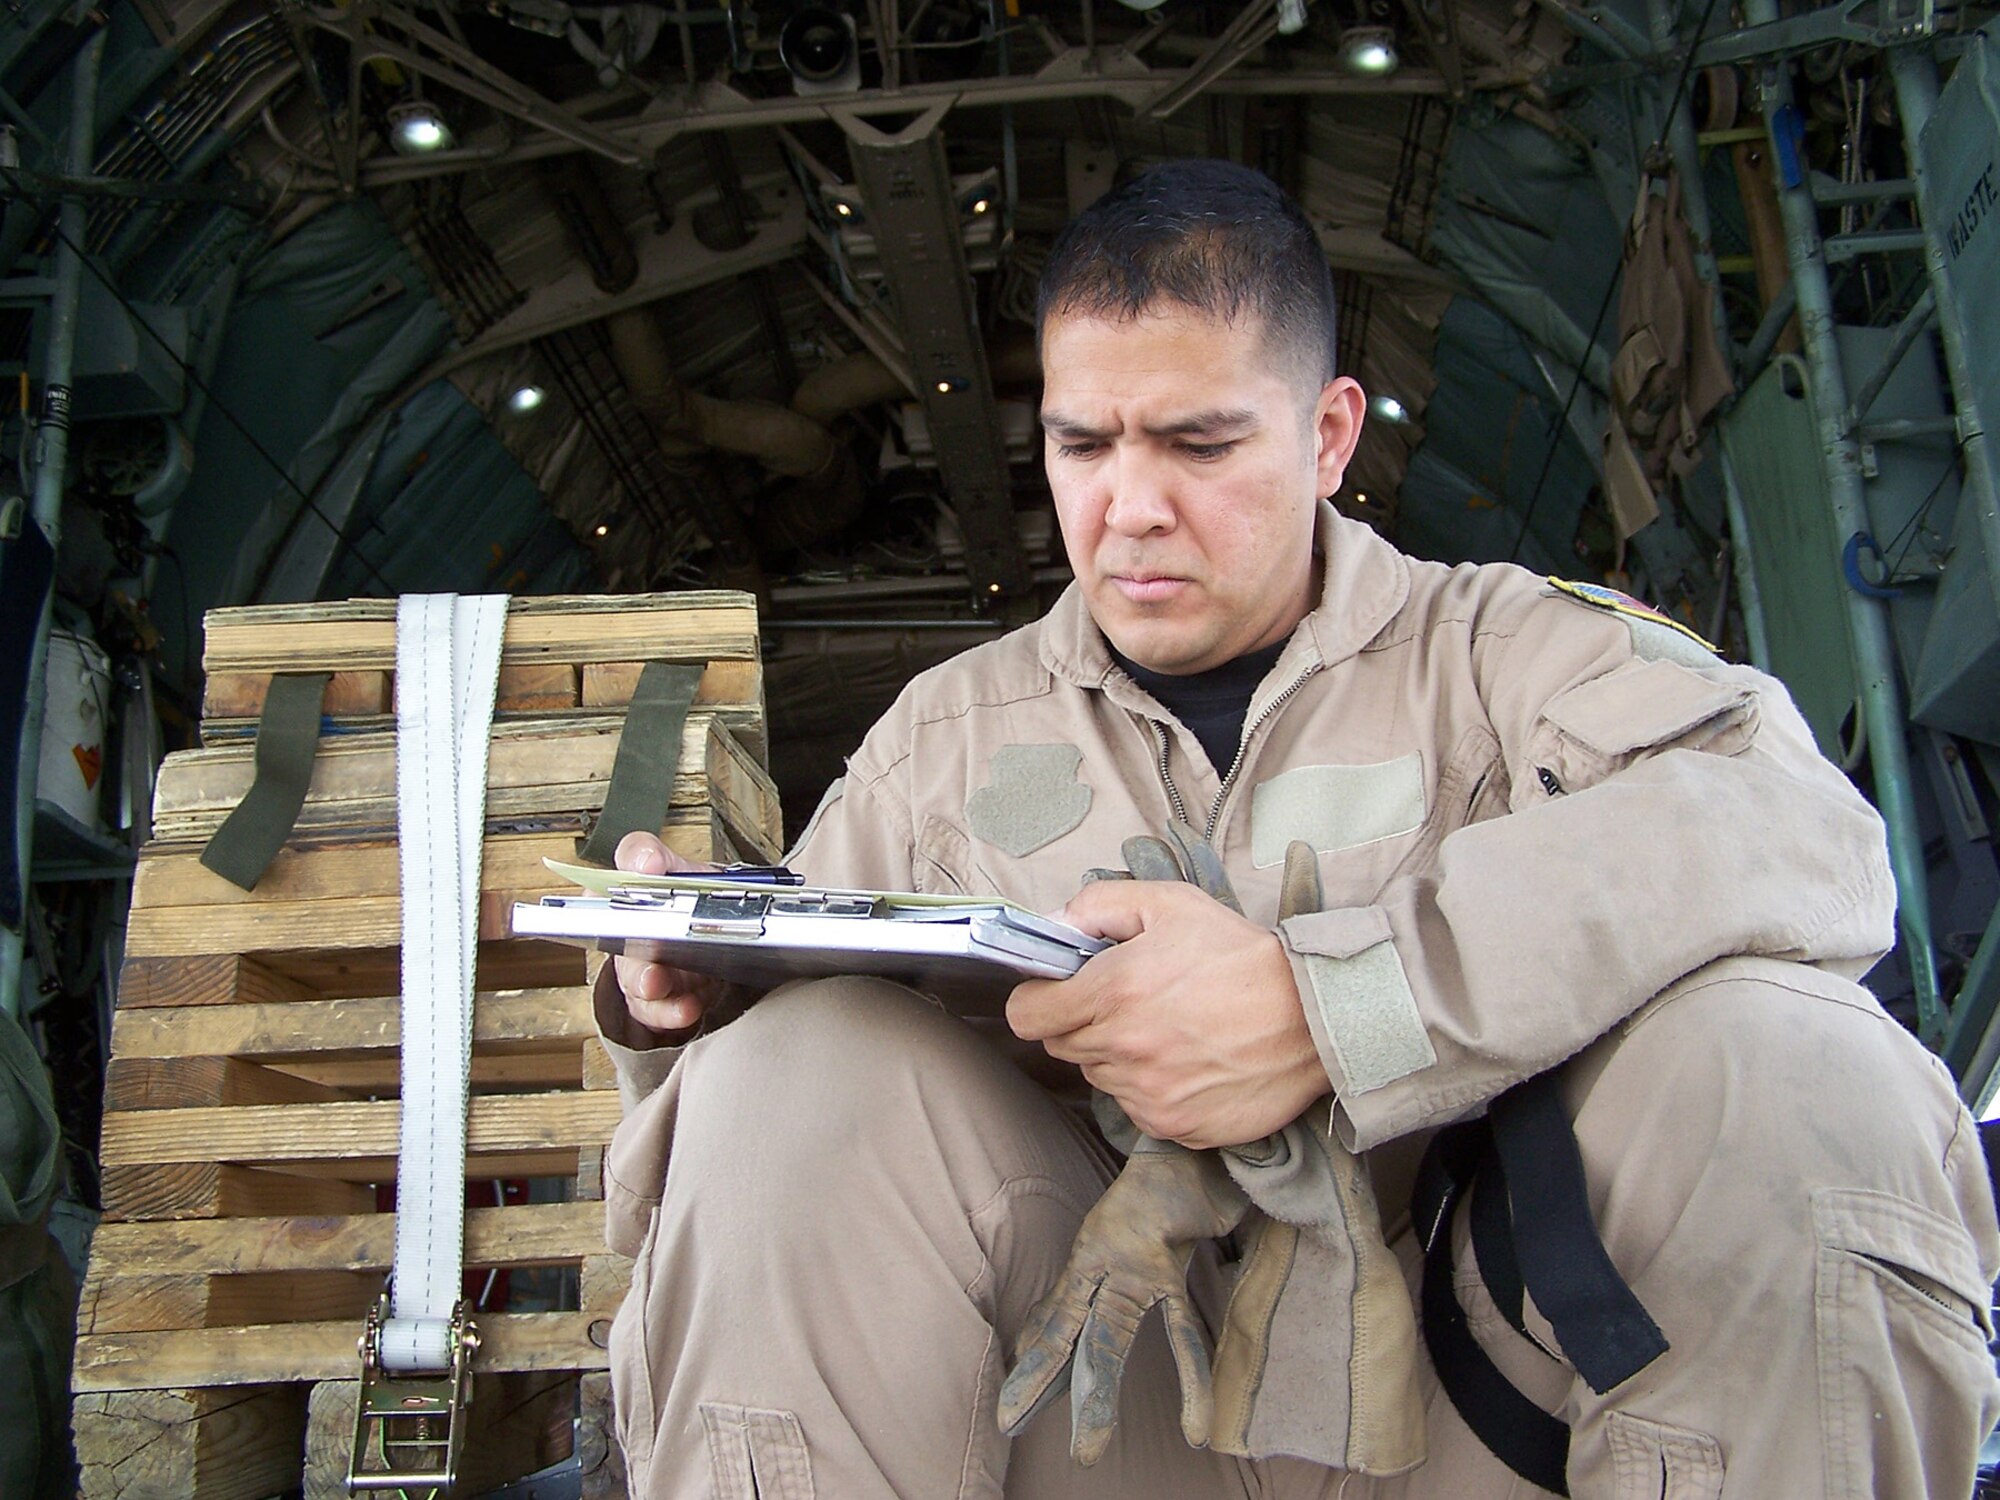 SOUTHWEST ASIA -- Staff Sgt. Pablo Herrera, 737th Expeditionary Airlift Squadron instructor loadmaster, is deployed from the 40th Airlift Squadron at Dyess Air Force Base, Texas. (U.S. Air Force courtesy photo)